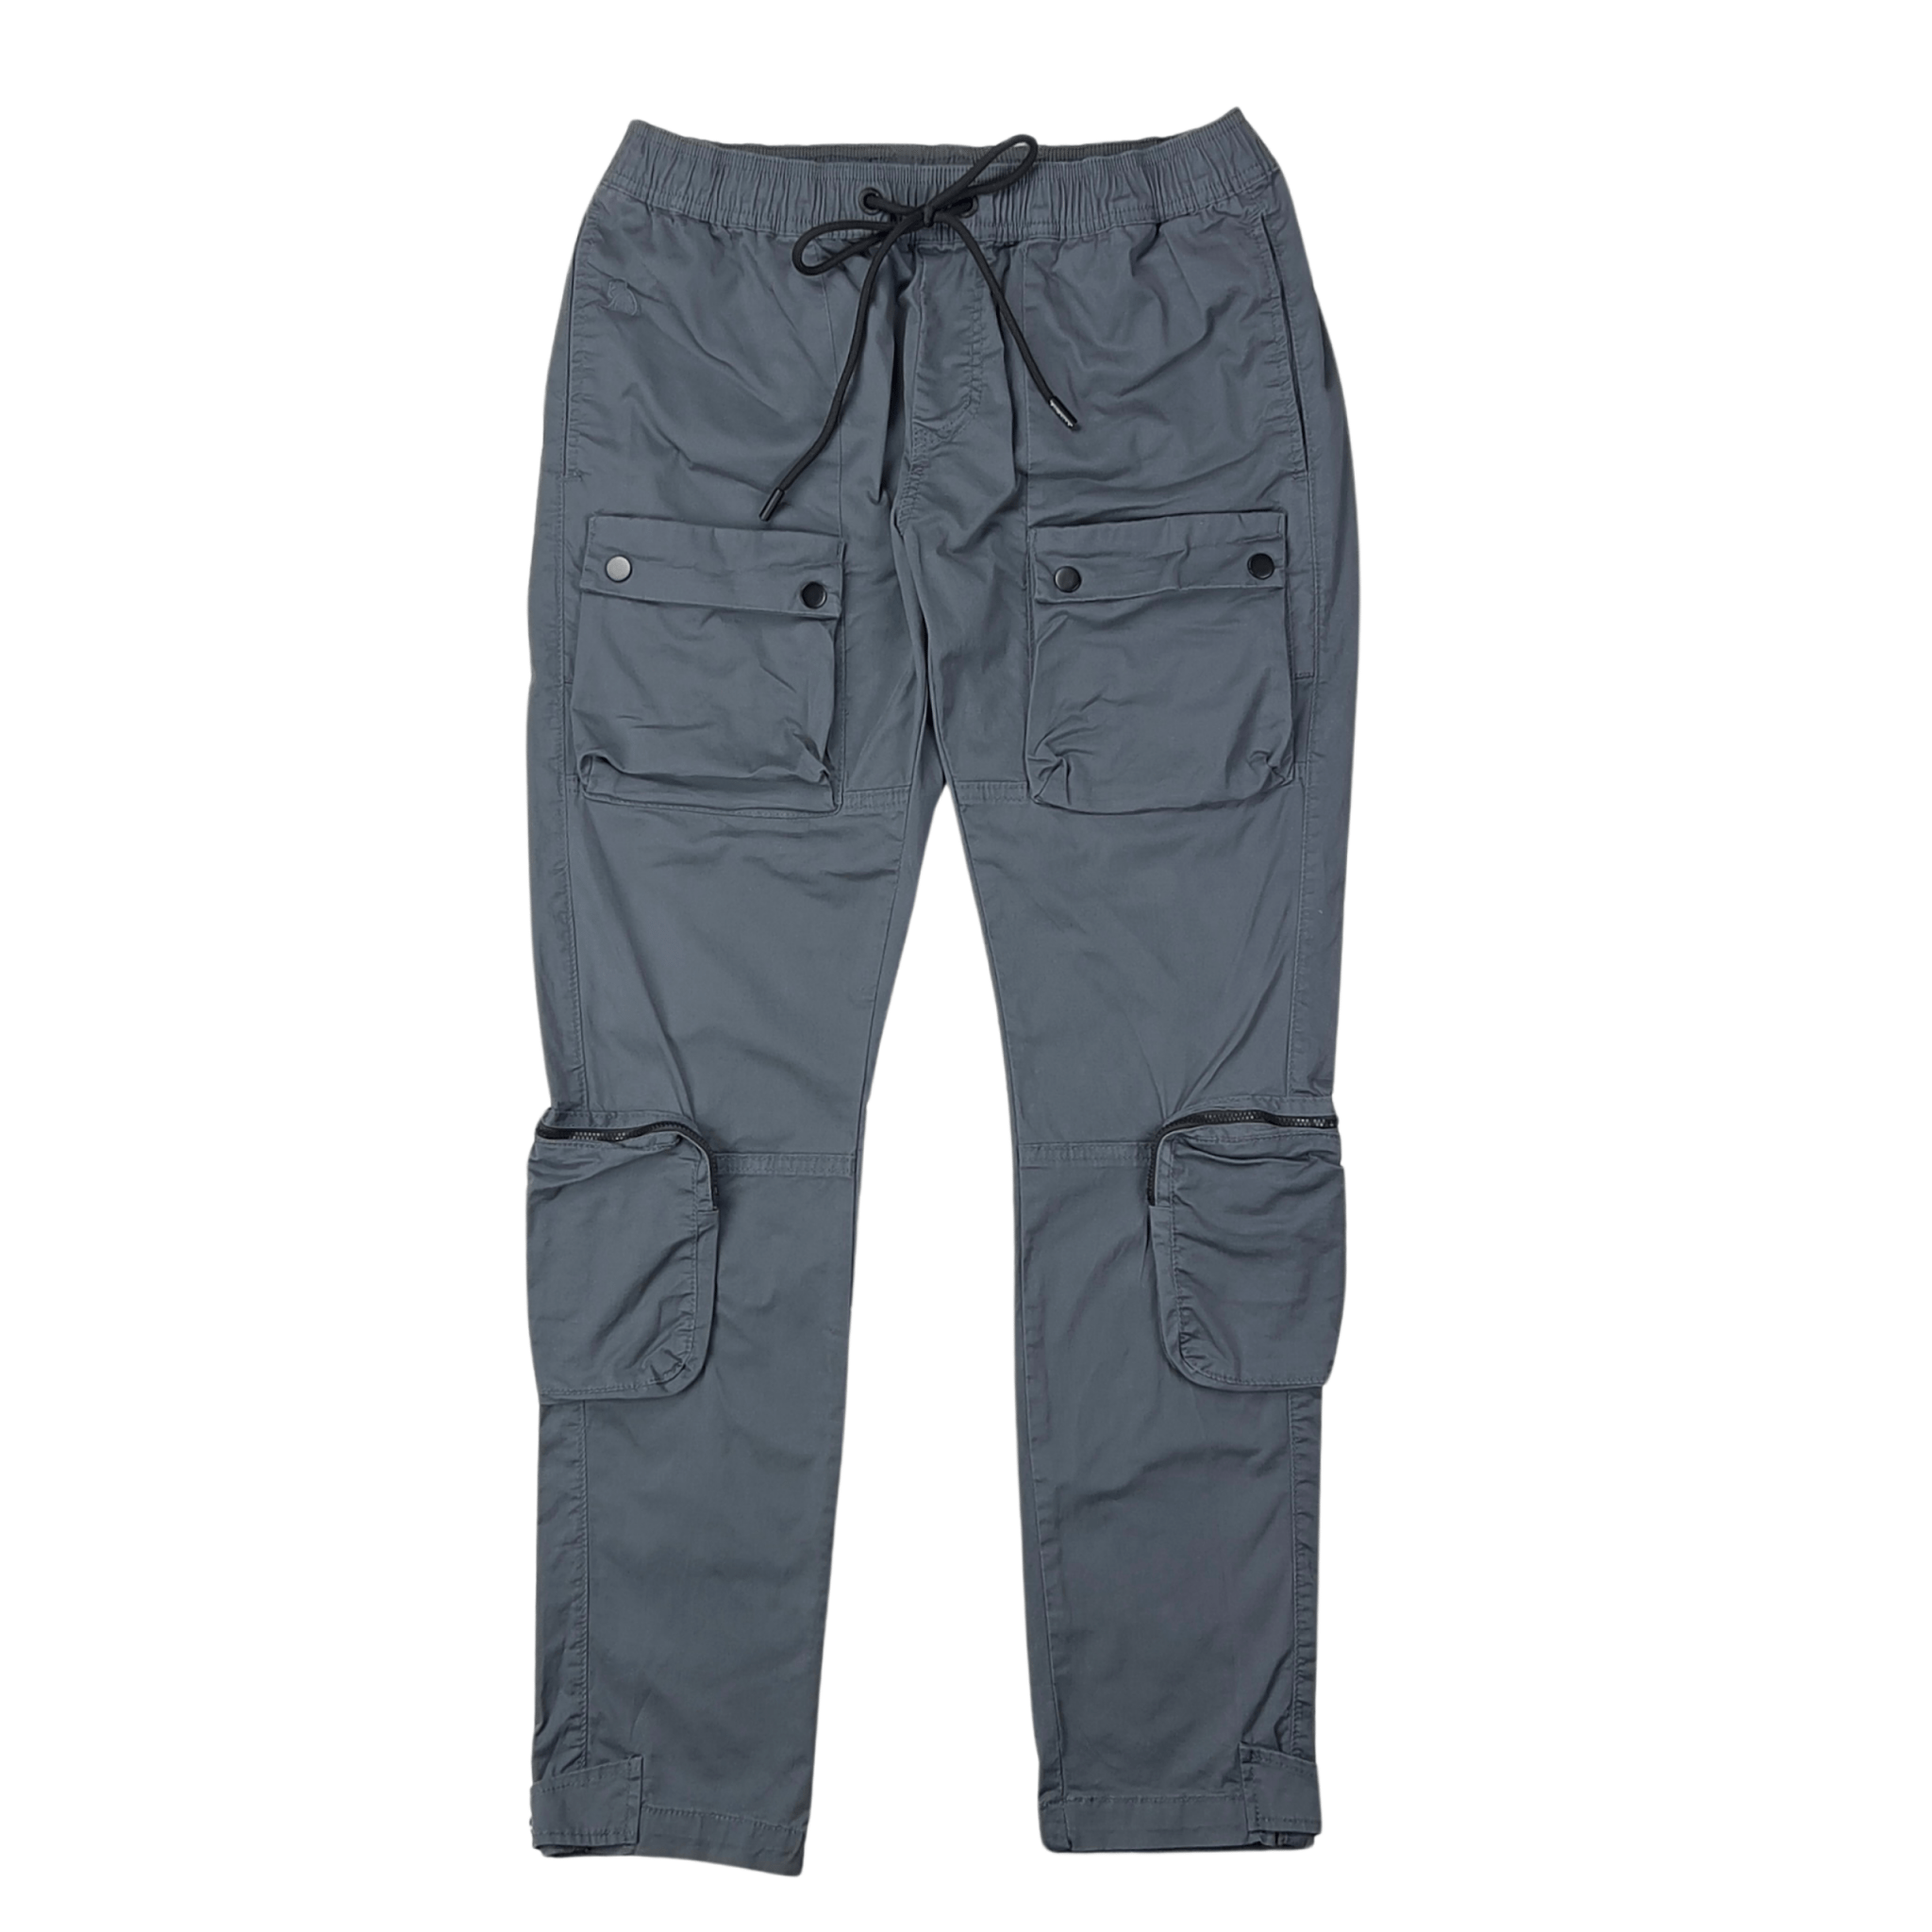 Utility Pants in charcoal